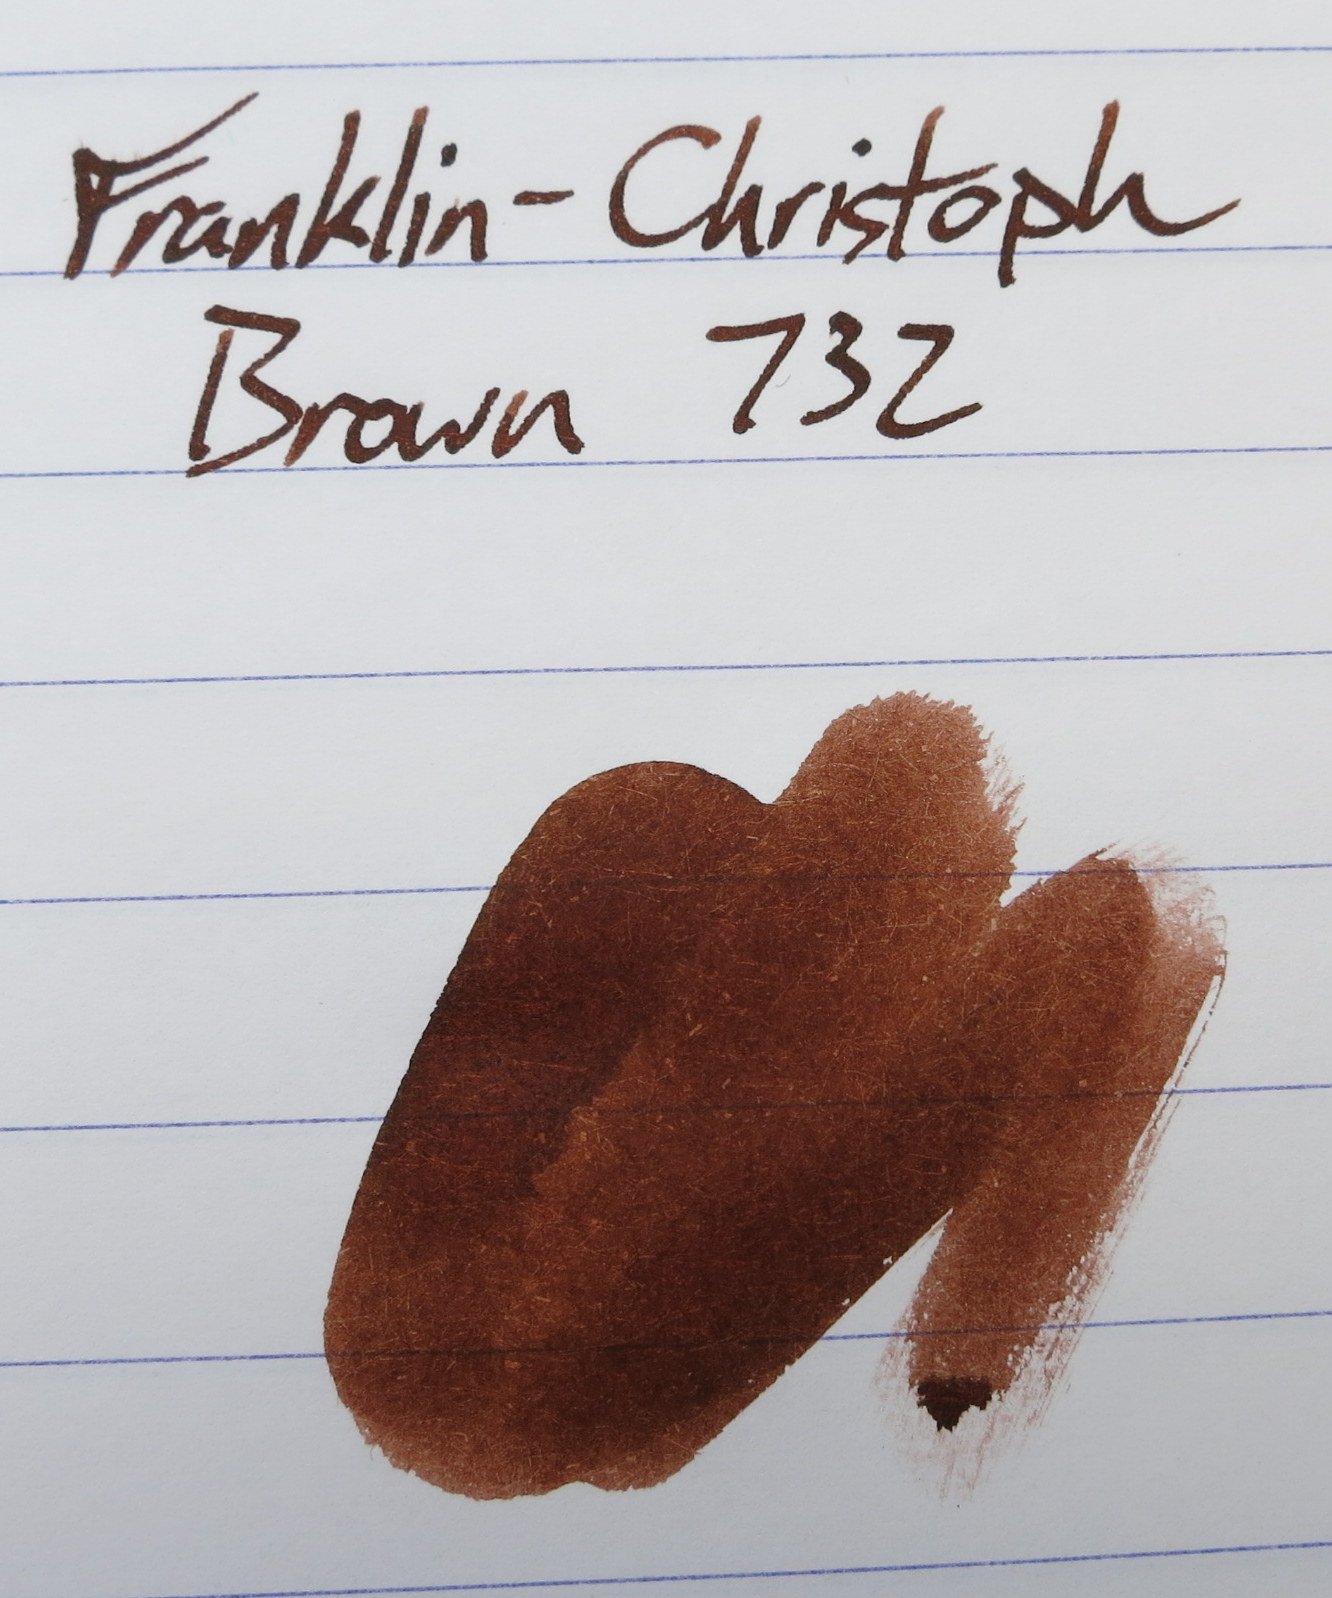 Brown Inks!  Fountain Pen Ink Comparison No. 6 